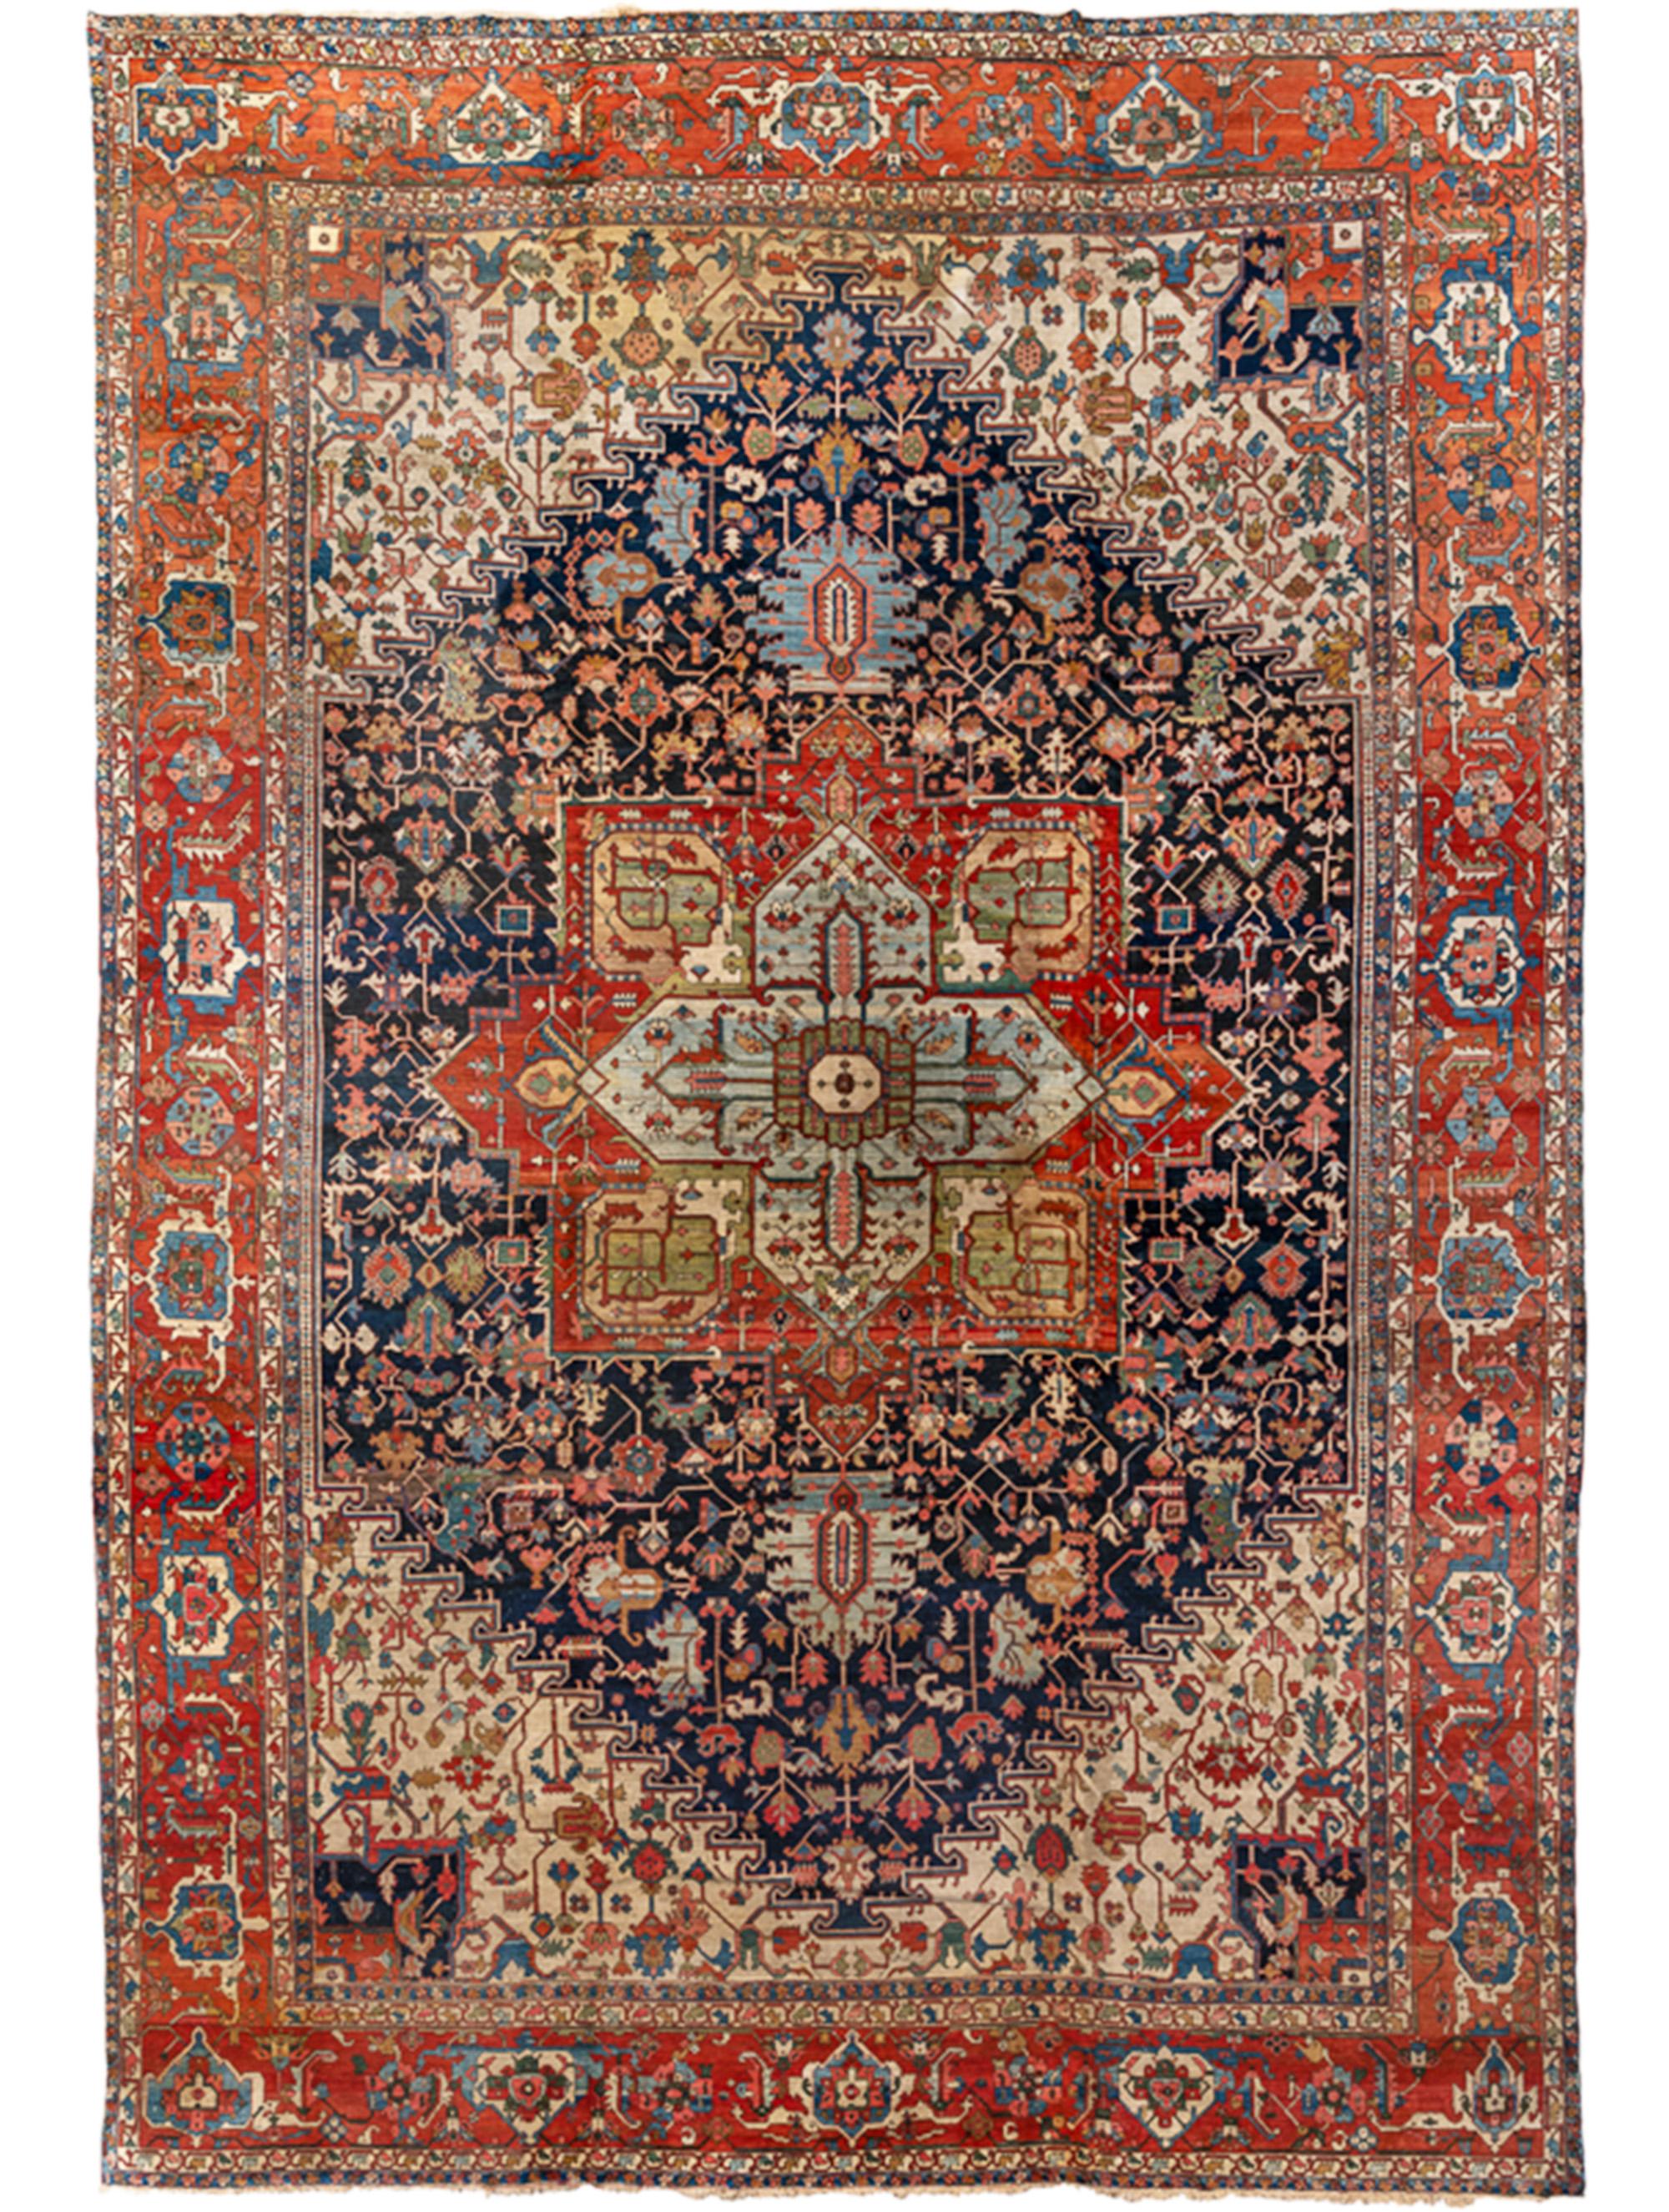 Antique Persian Fine Serapi Handwoven Luxury Wool Rug 14'-8" x 21'-4" Size For Sale